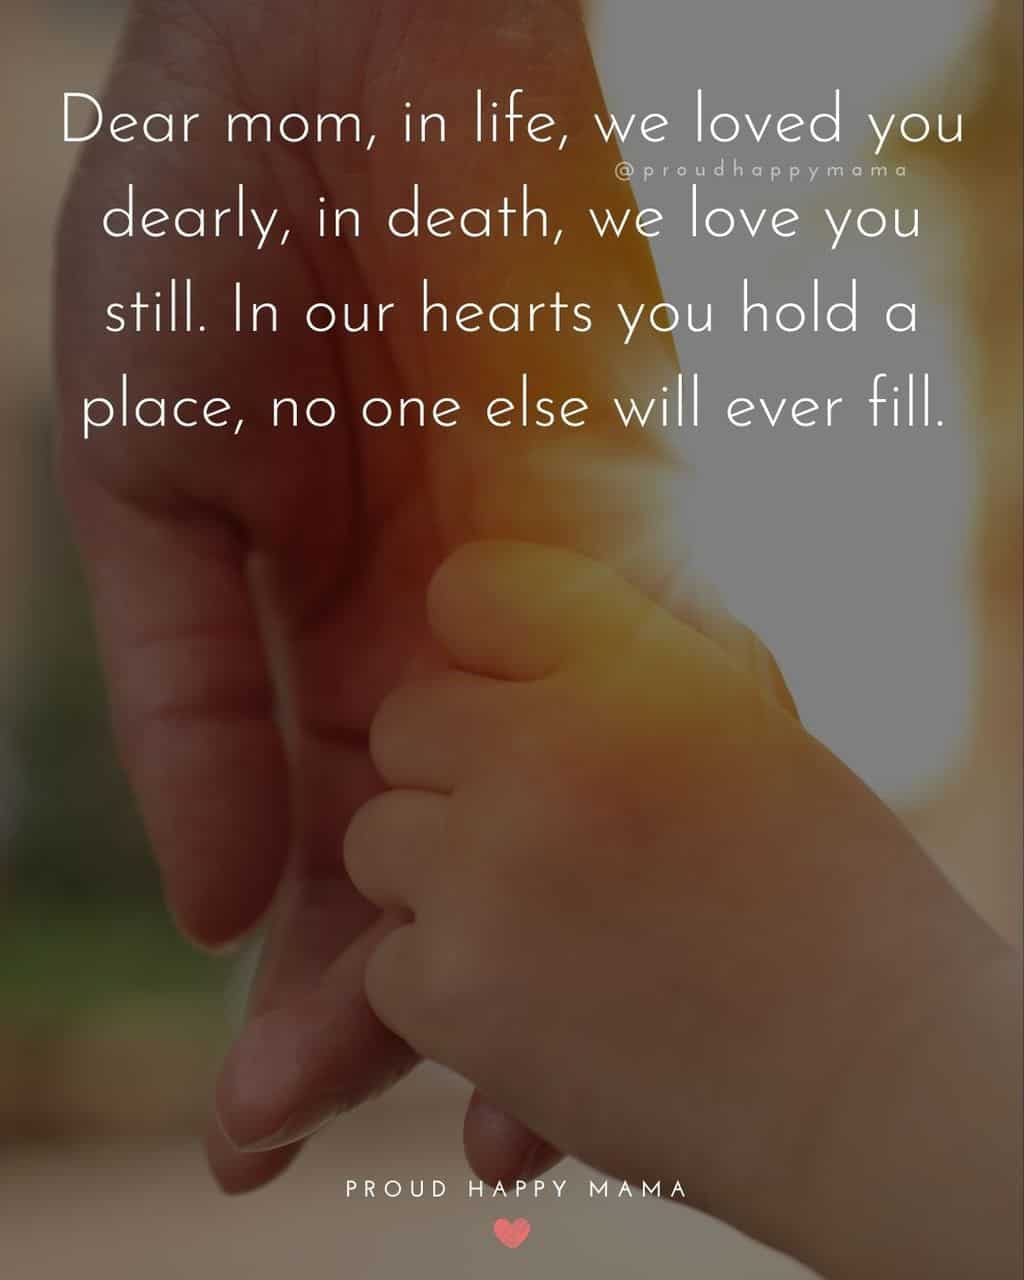 Child holding mother's pinky finger with text overlay, ‘Dear mom, in life, we loved you dearly, in death, we love you still. In our hearts you hold a place, no one else will ever fill.’